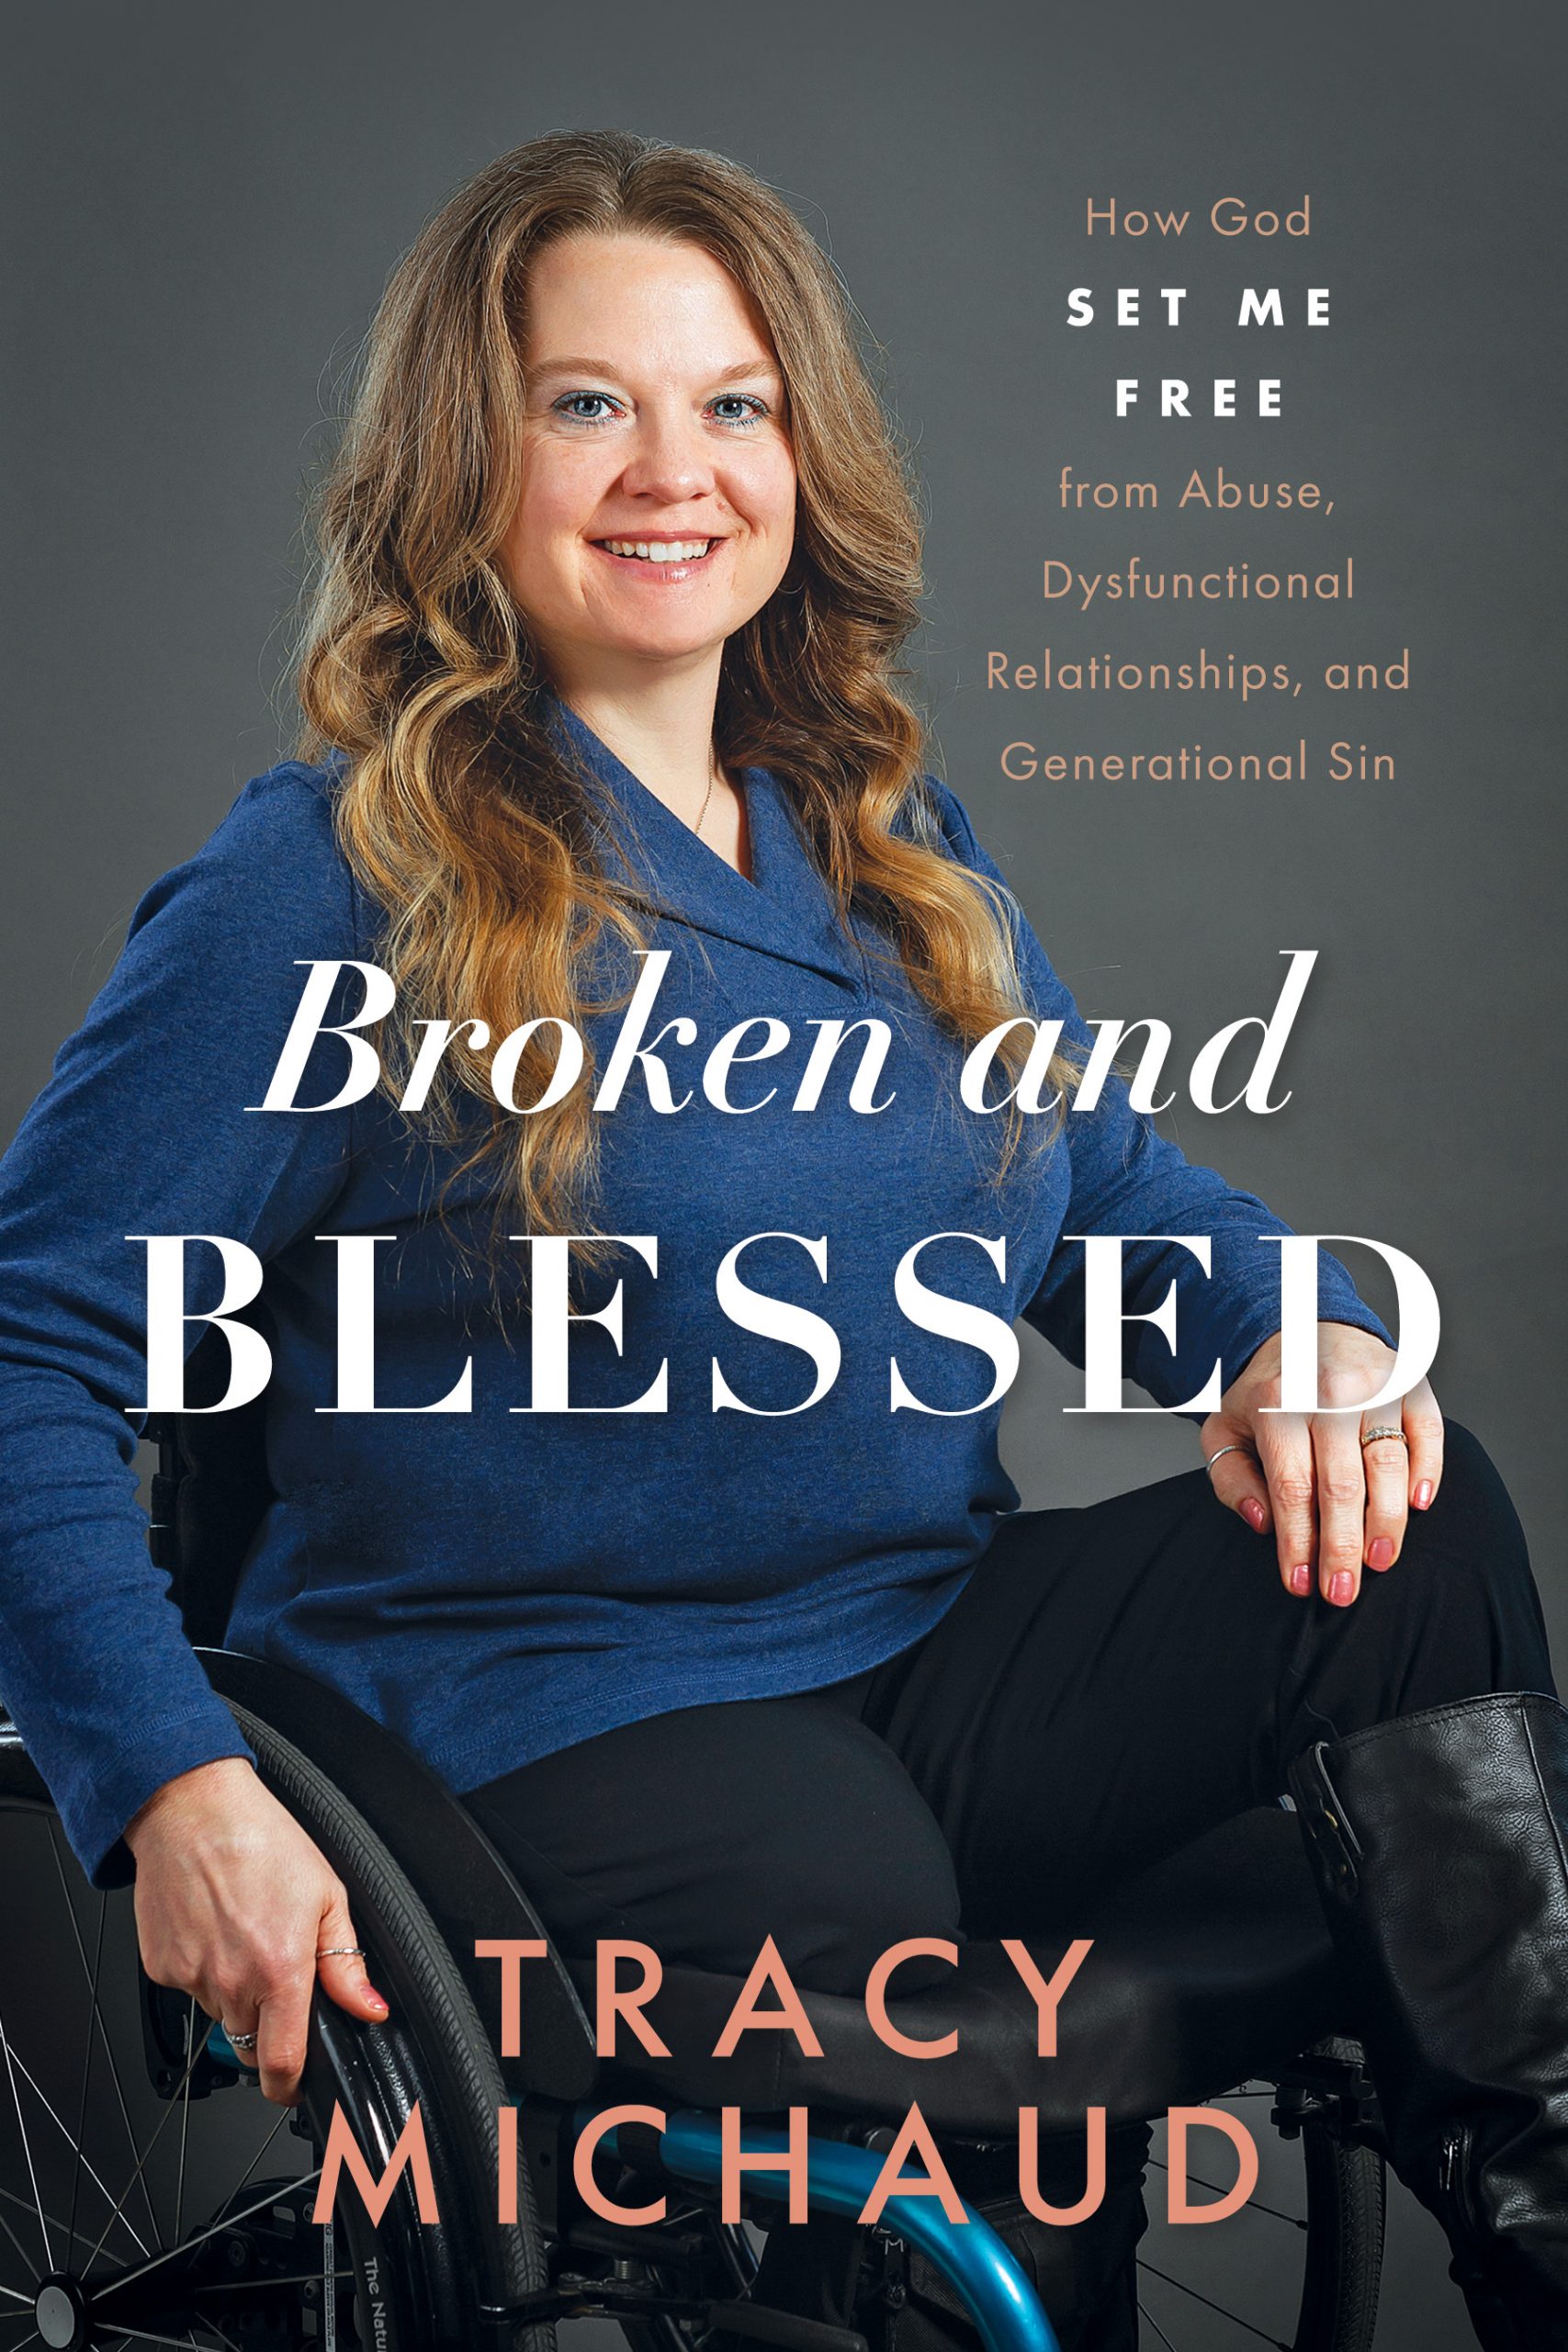 Broken Blessed: How God Set Me Free from Abuse, Dysfunctional Relationships, and Generational - Redemption Press